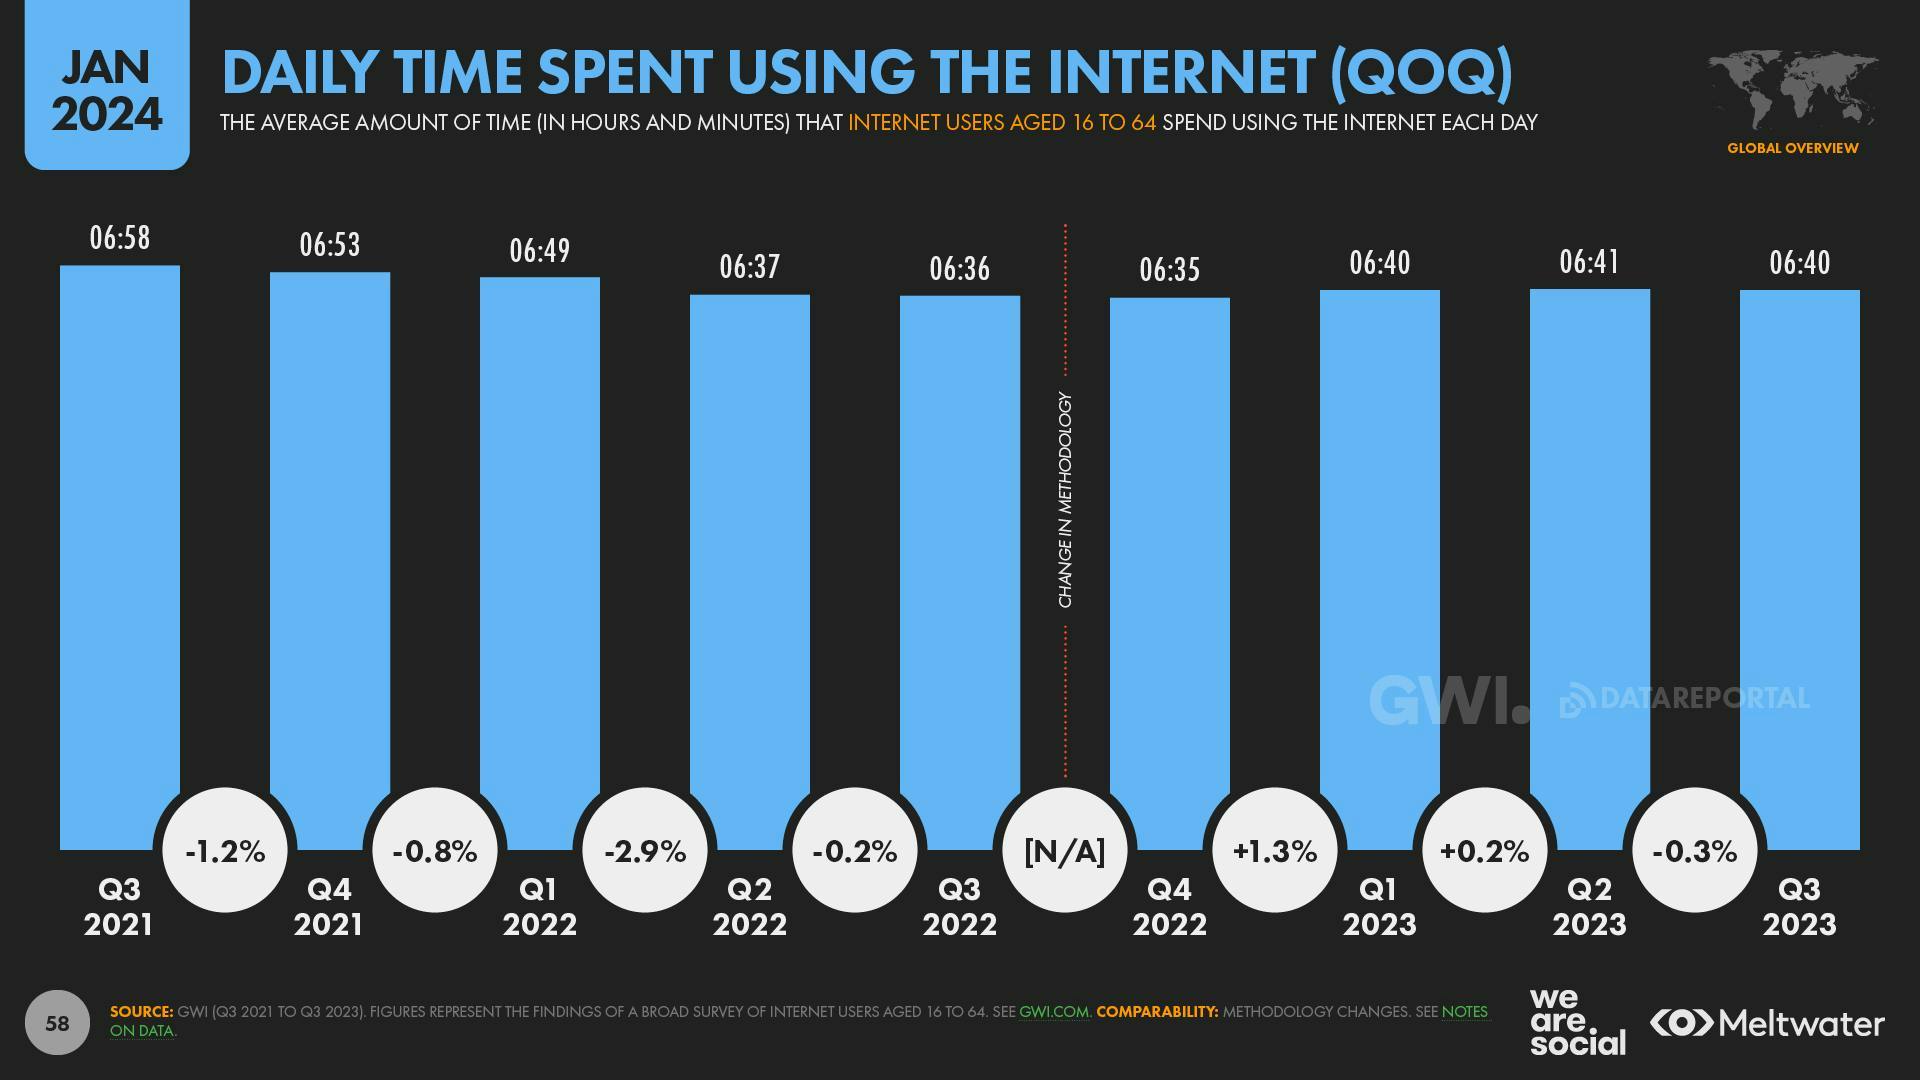 Daily time spent using the internet (QOQ)